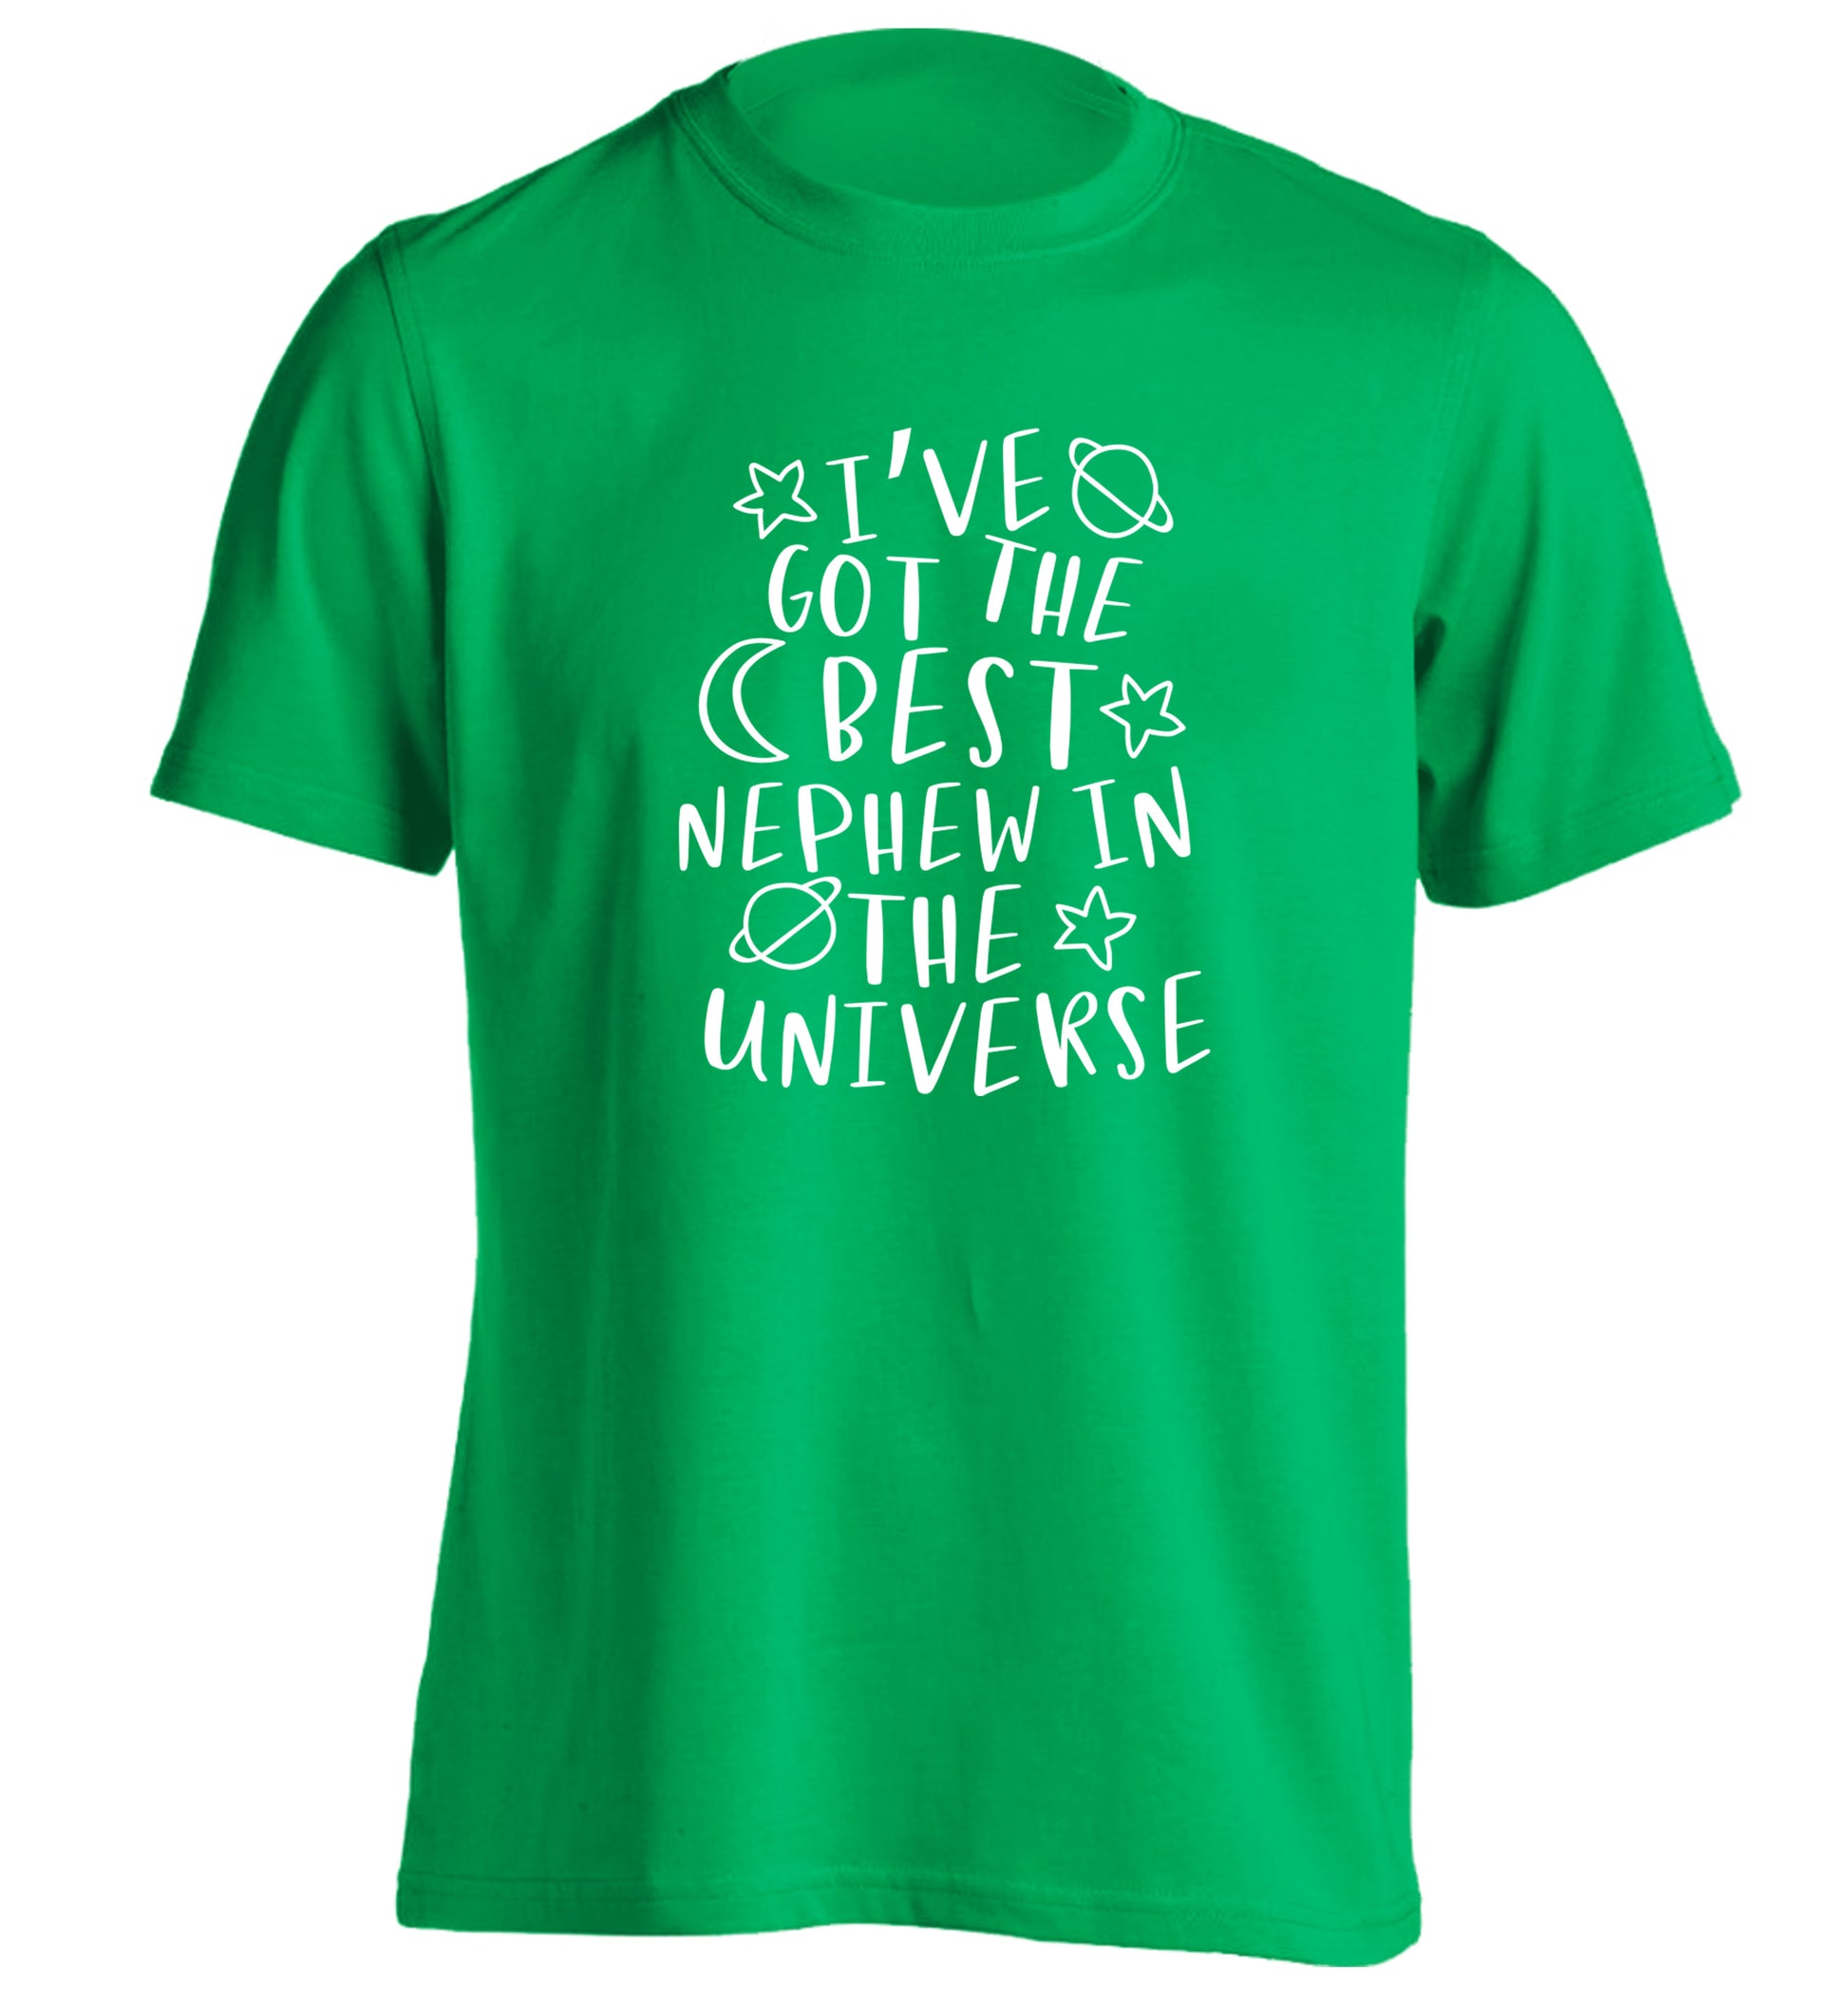 I've got the best nephew in the universe adults unisex green Tshirt 2XL